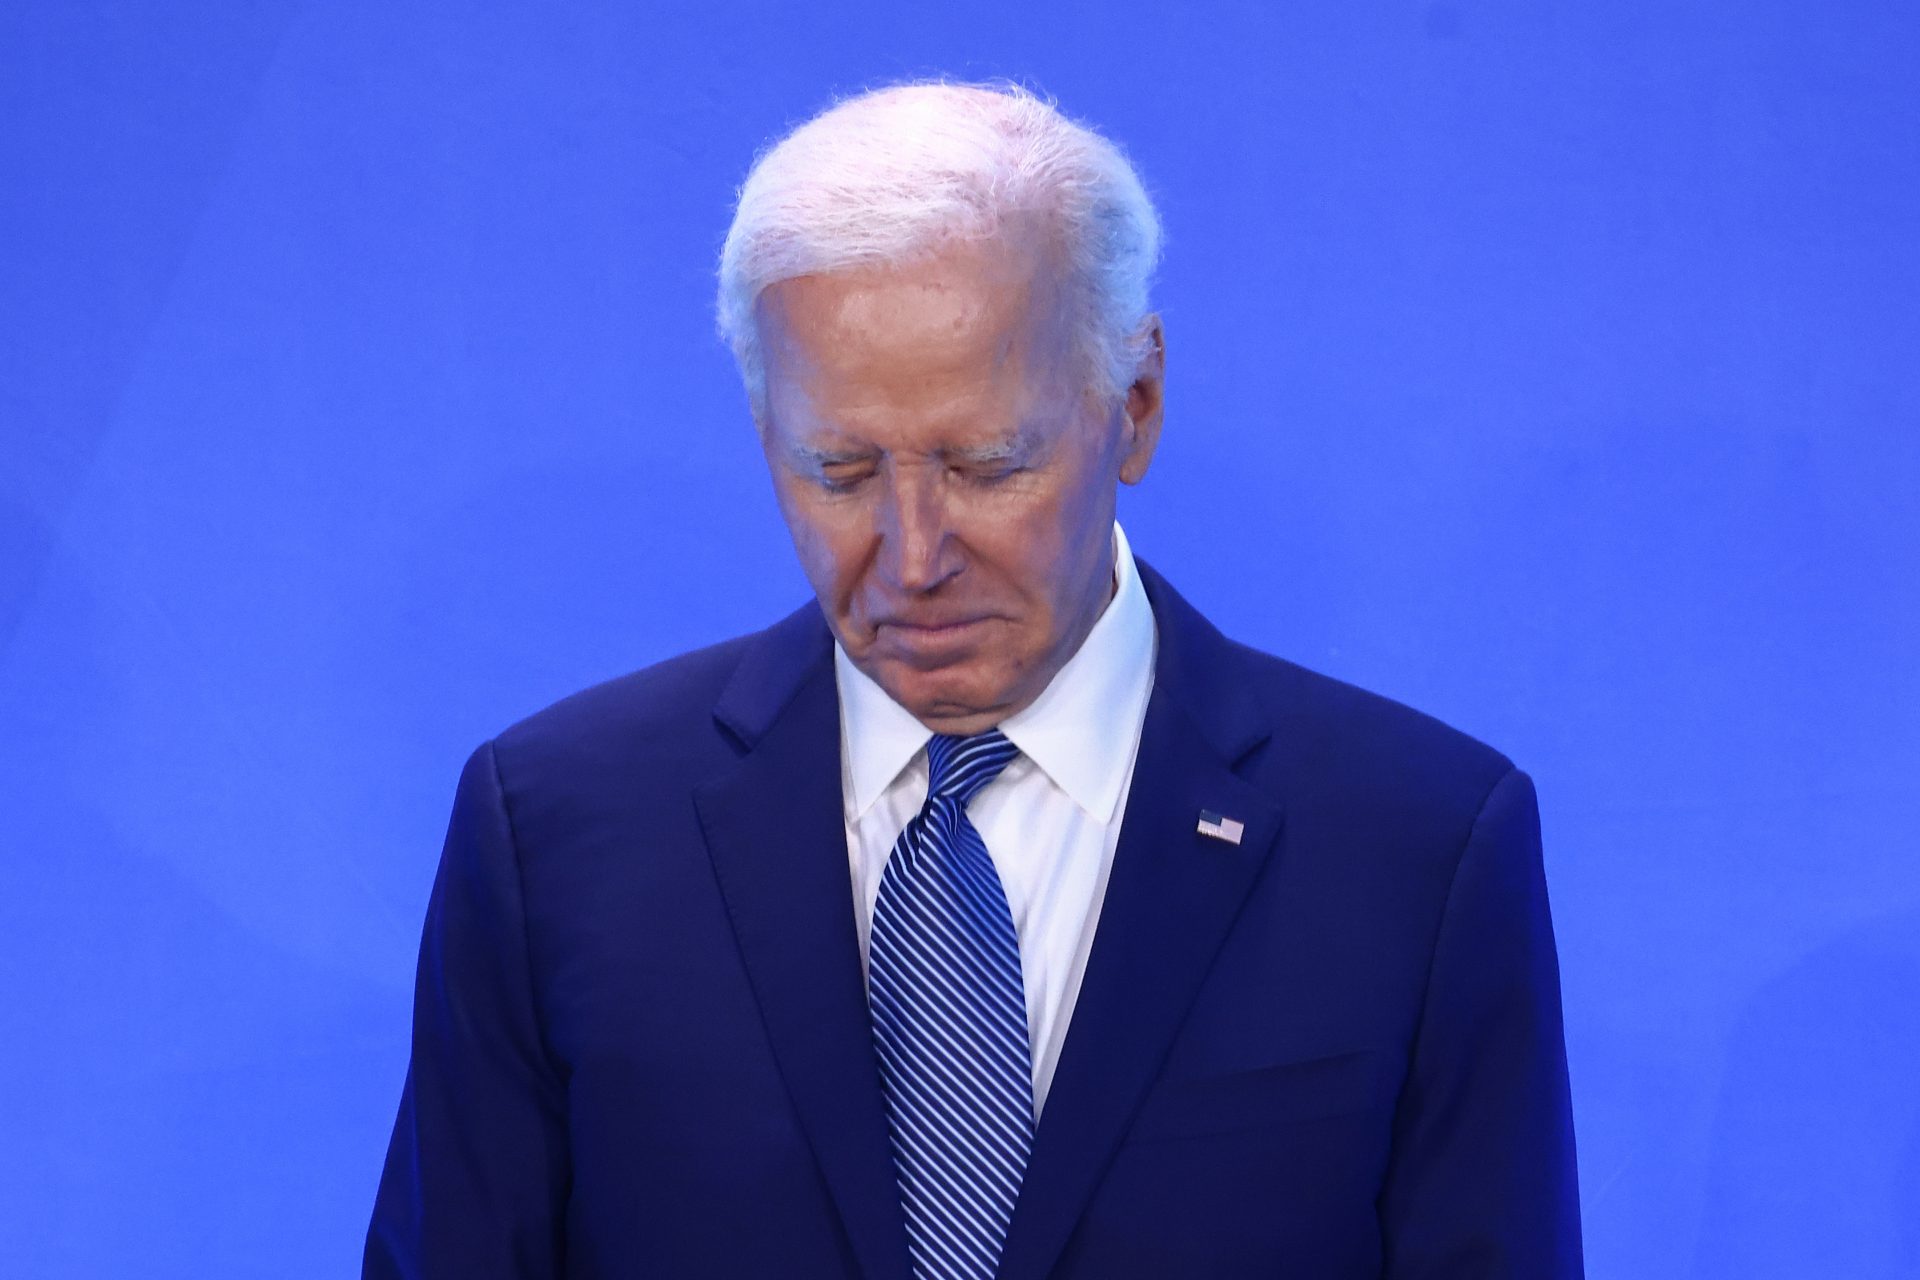 Who would be a good replacement for Biden now that he has dropped out? These are the options